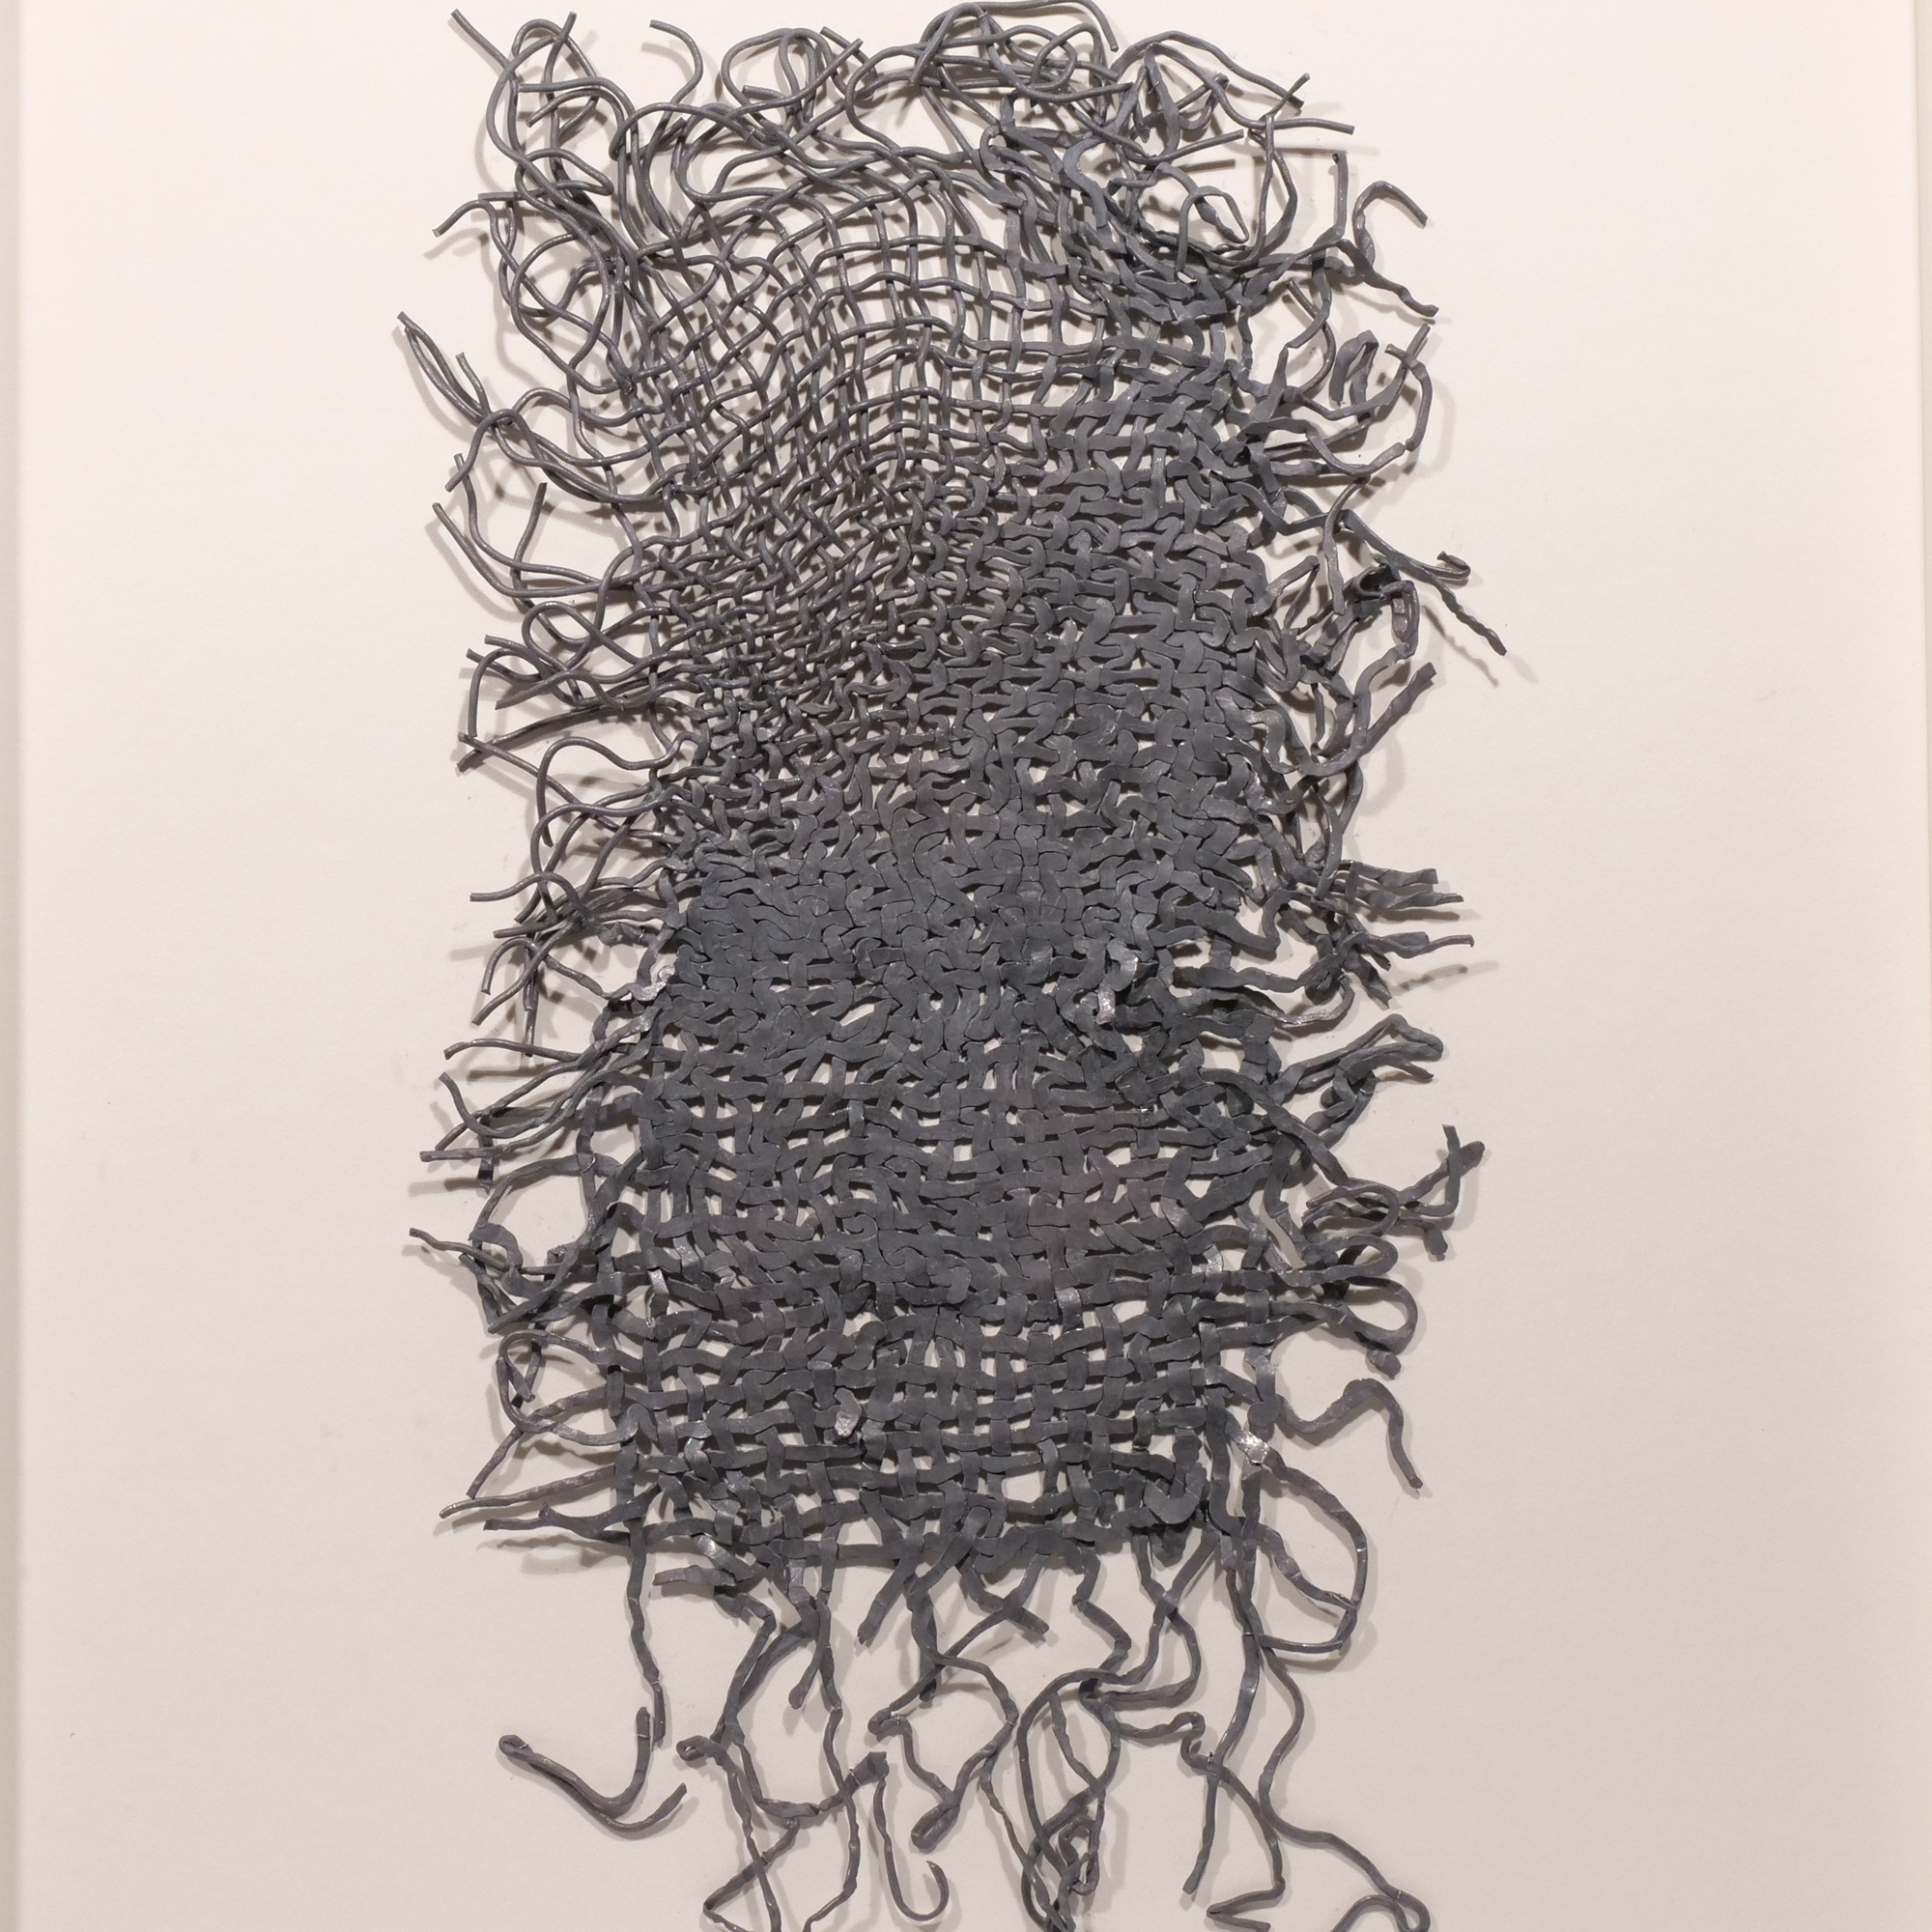 Artwork by Sue Lawty, Untitled, 2007, Made of metallic